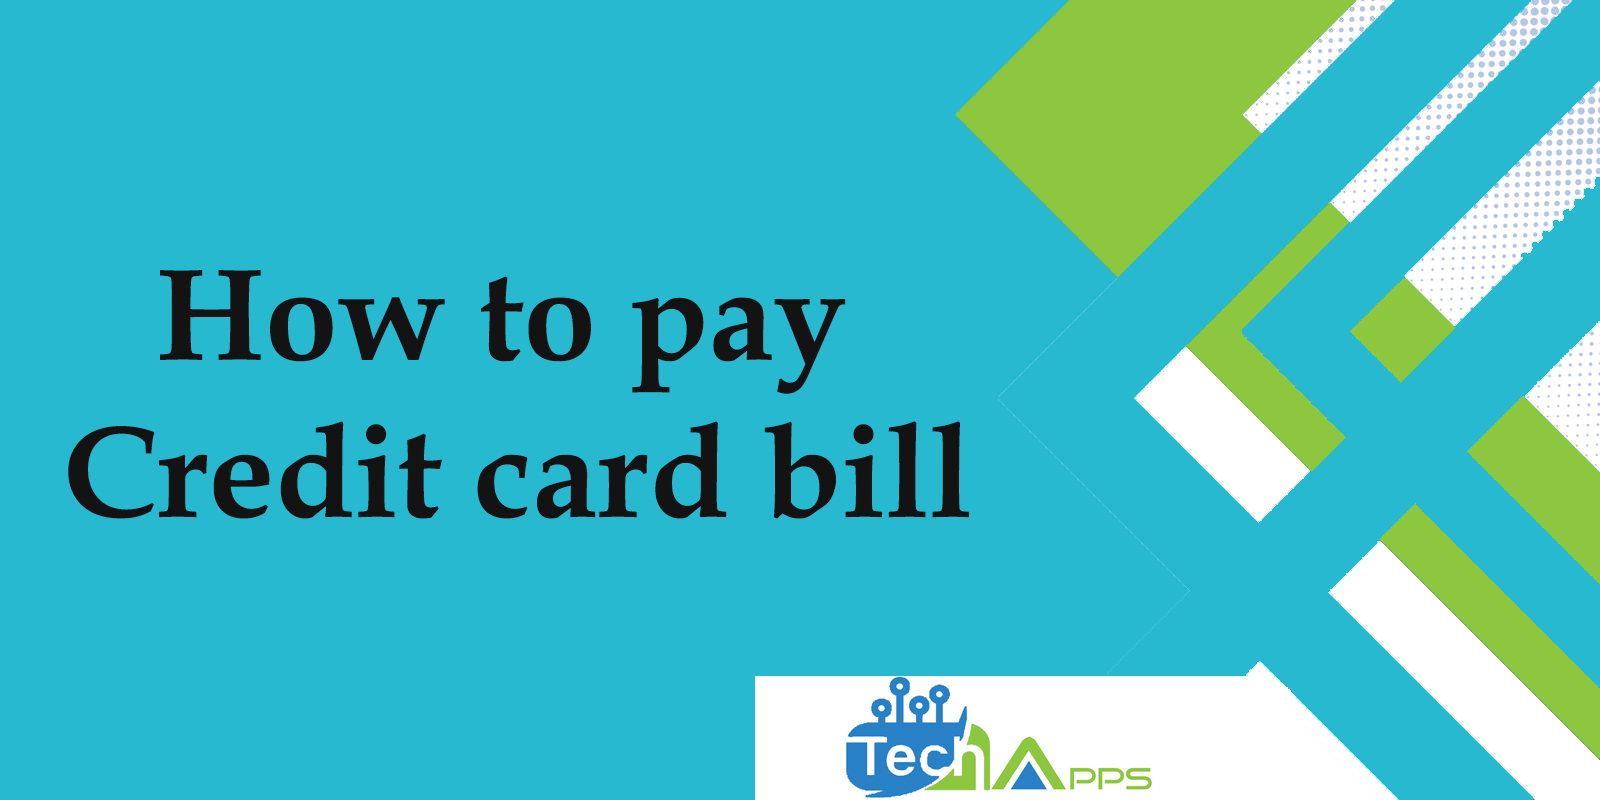 How to pay Credit card bill